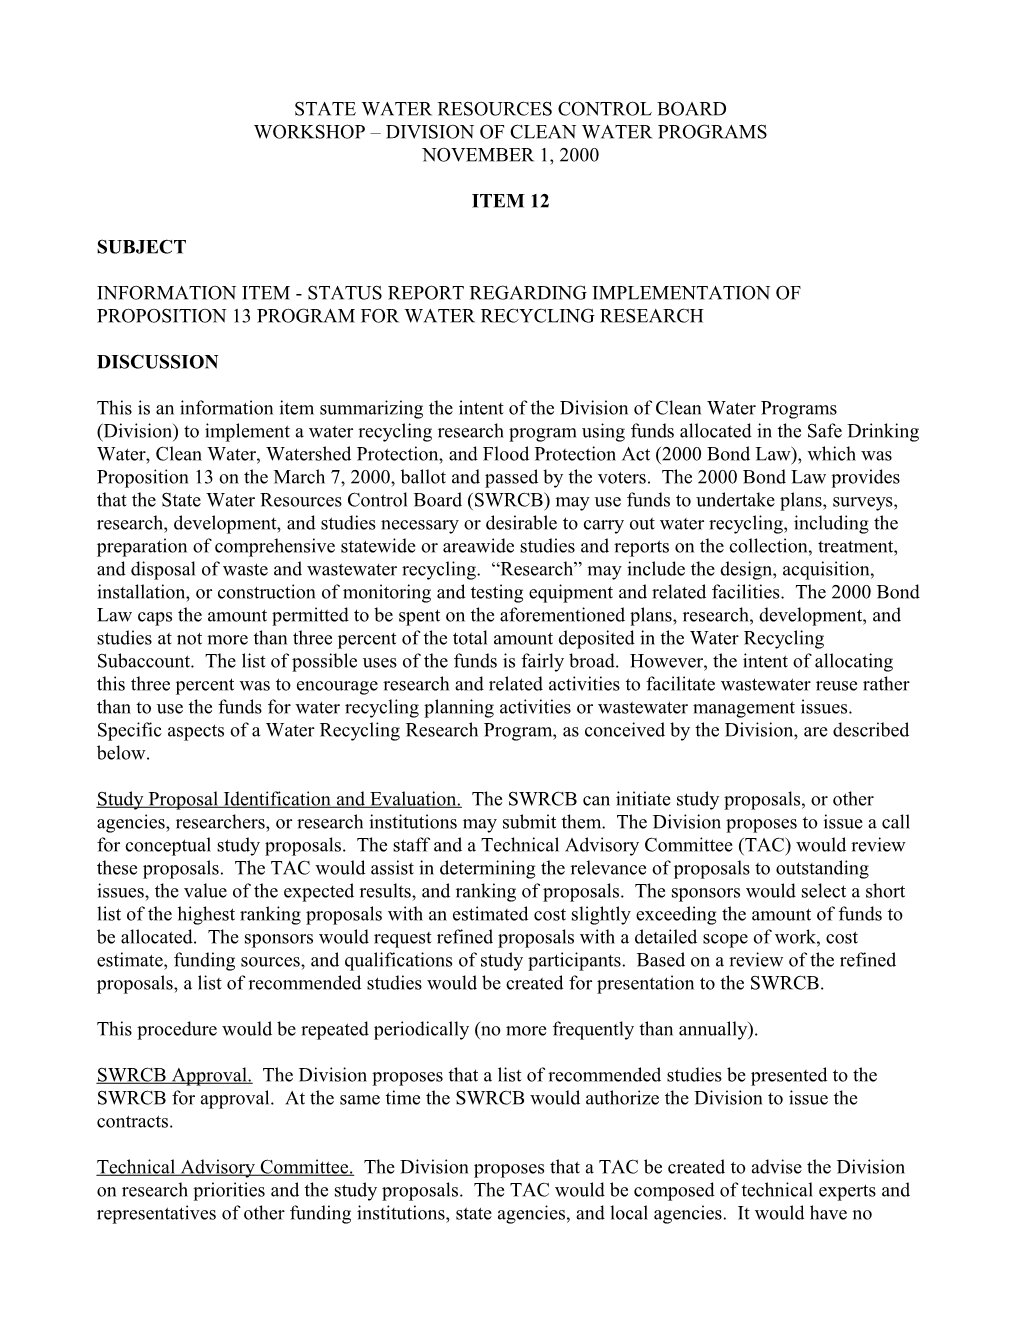 Water Recycling Research Program Information Agenda Item